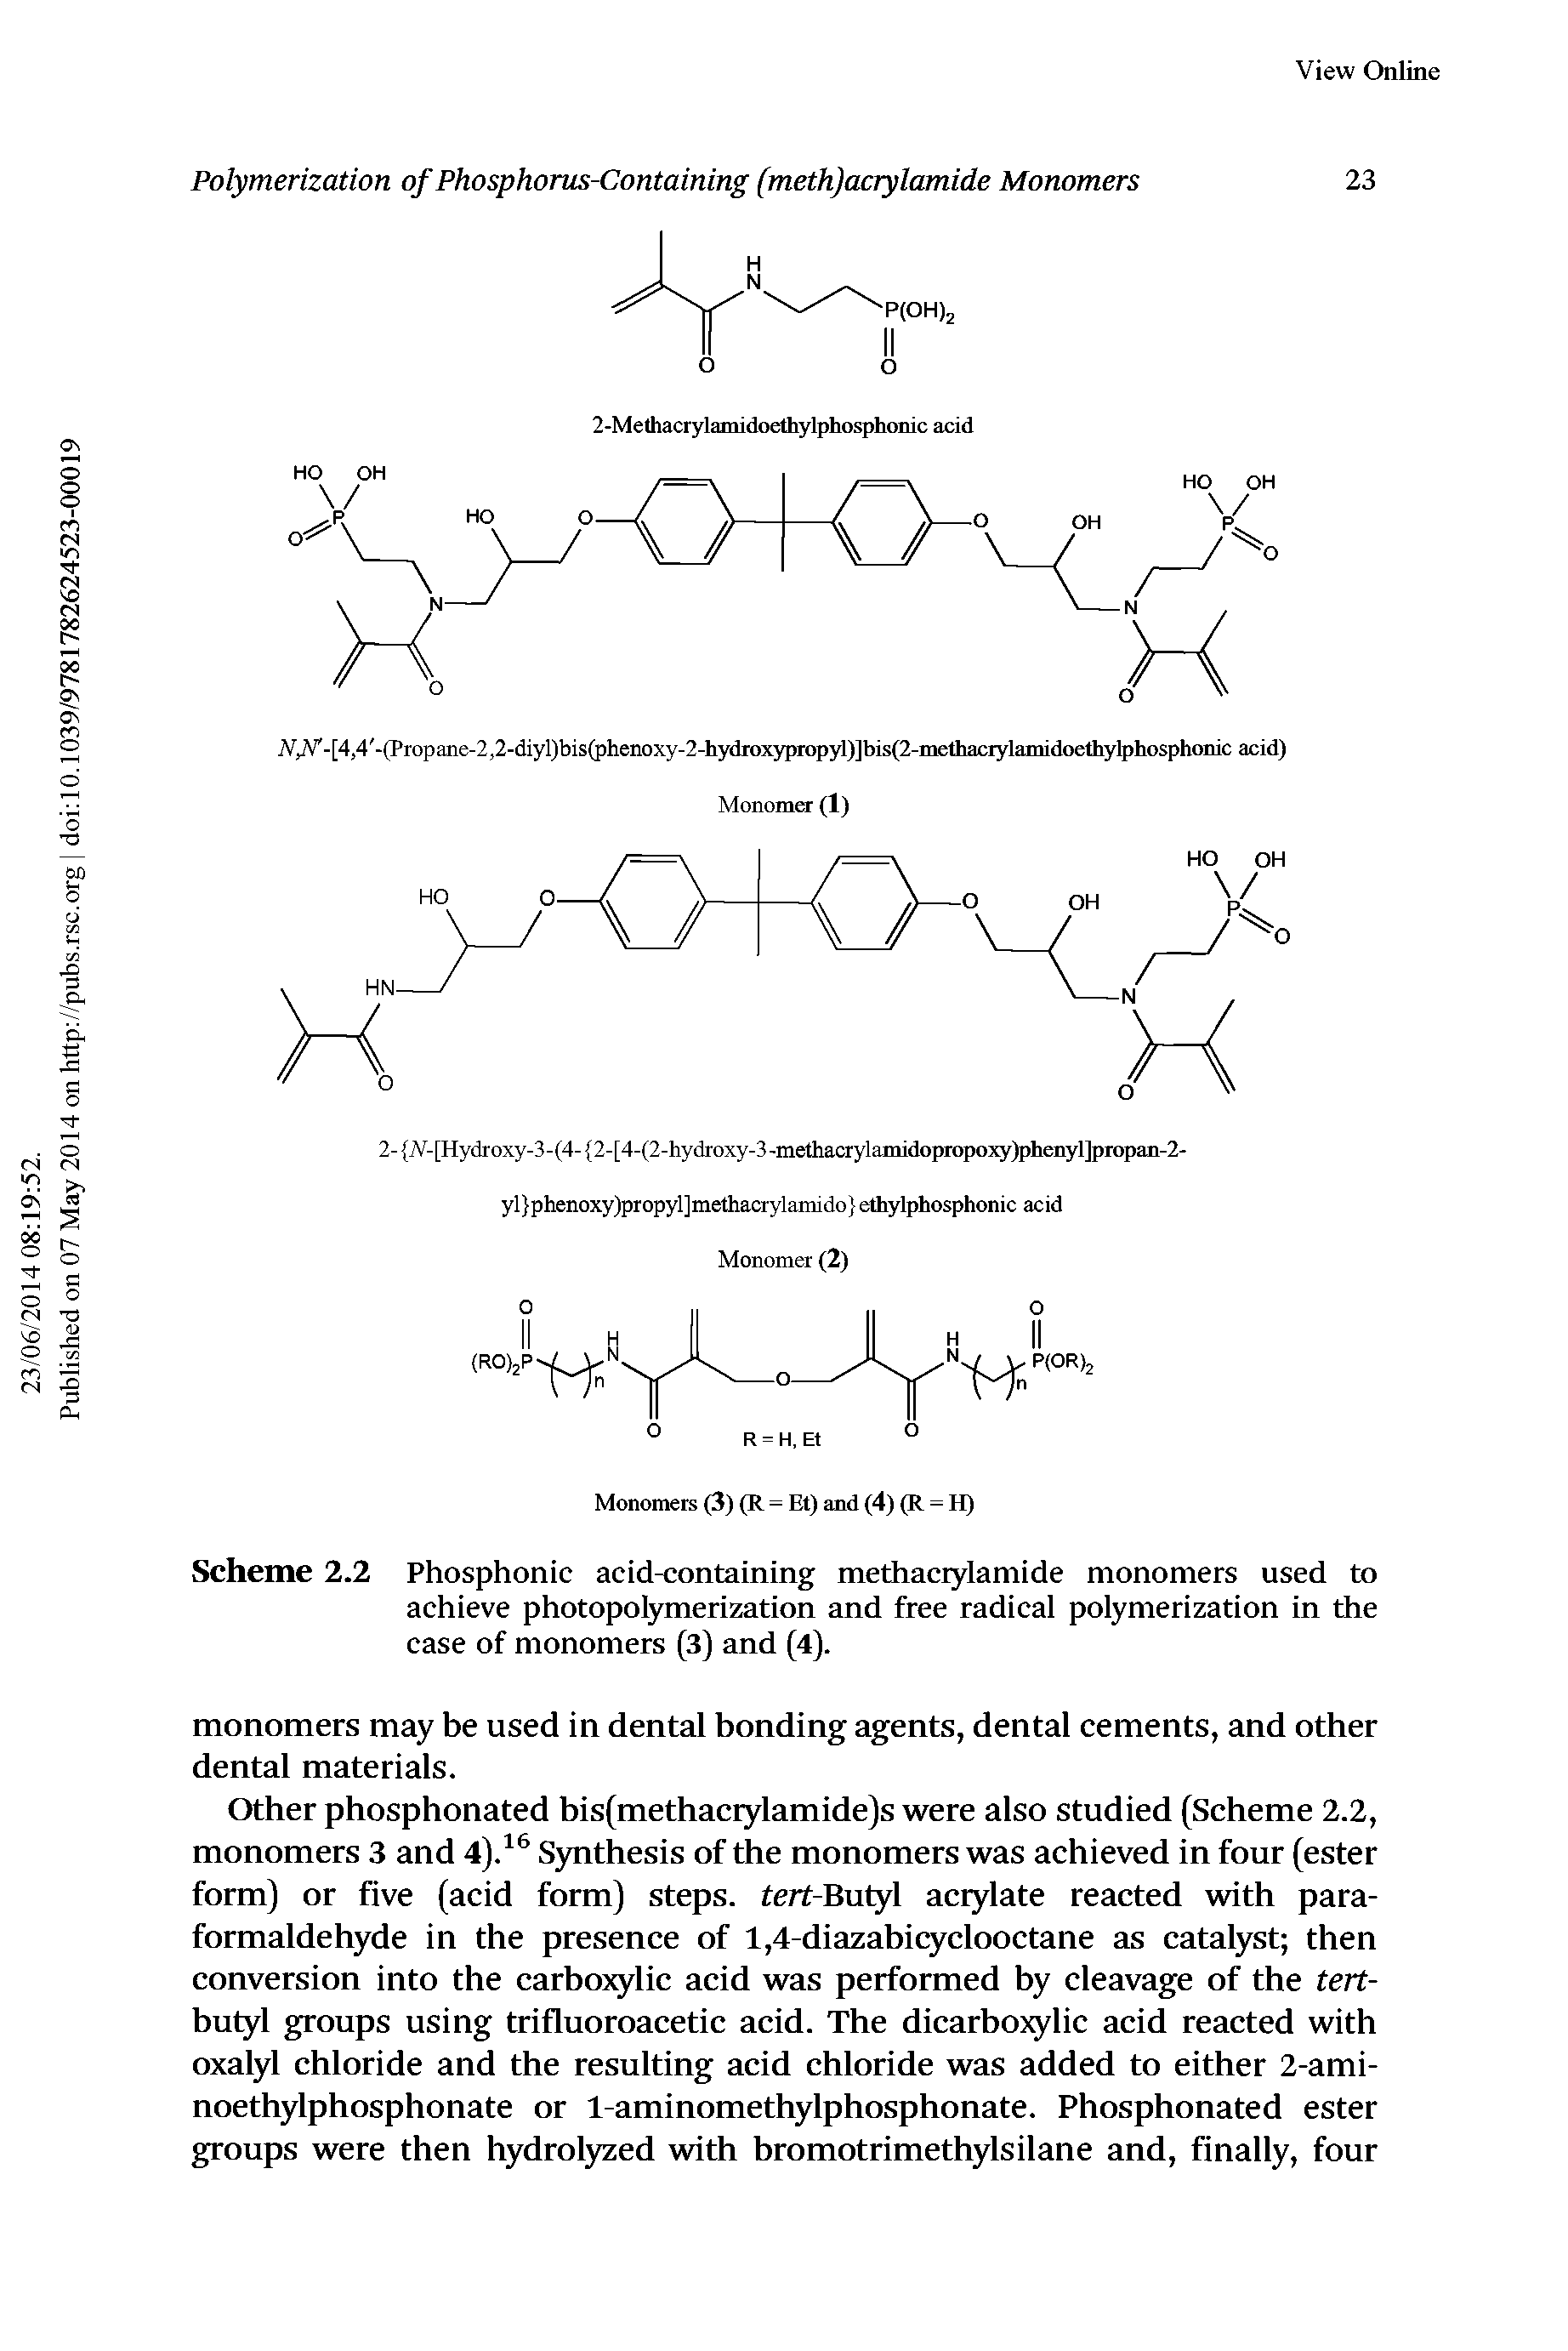 Scheme 2.2 Phosphonic acid-containing methacrylamide monomers used to achieve photopolymerization and free radical polymerization in the case of monomers (3) and (4).